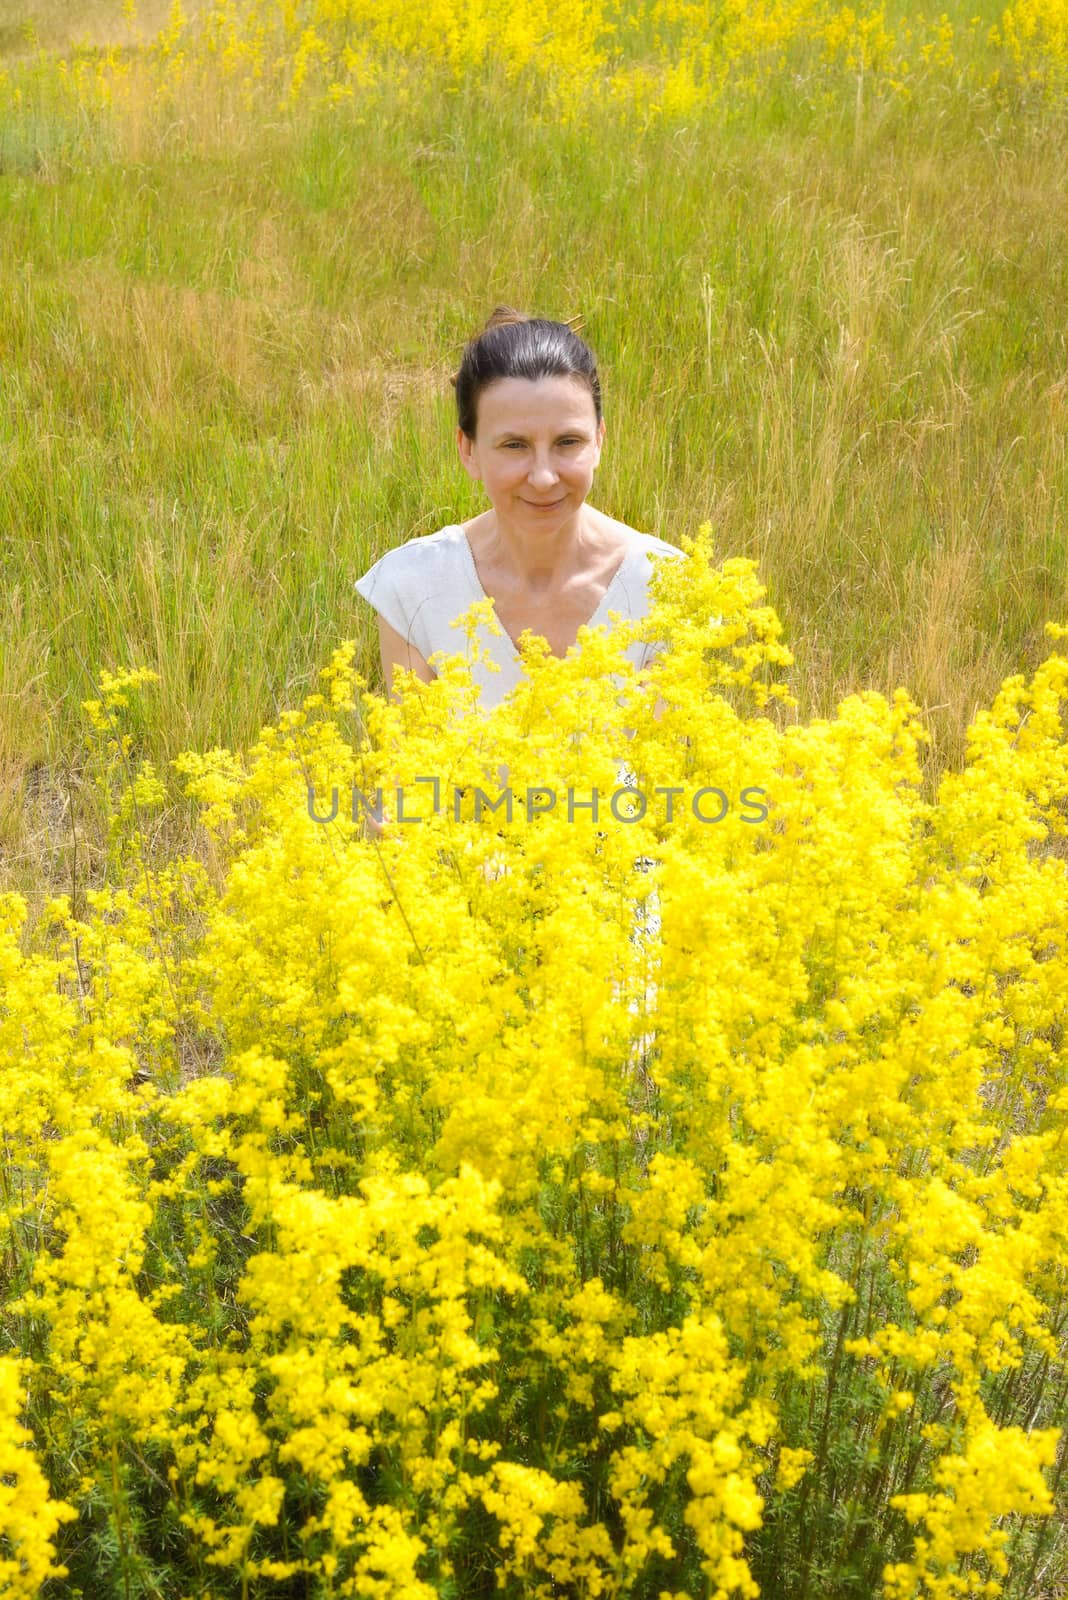 An adult woman stands up behind a bush of Galium verum flowers, also known as lady's bedstraw or yellow bedstraw, in the meadow under the warm and soft summer sun, in Kiev, Ukraine